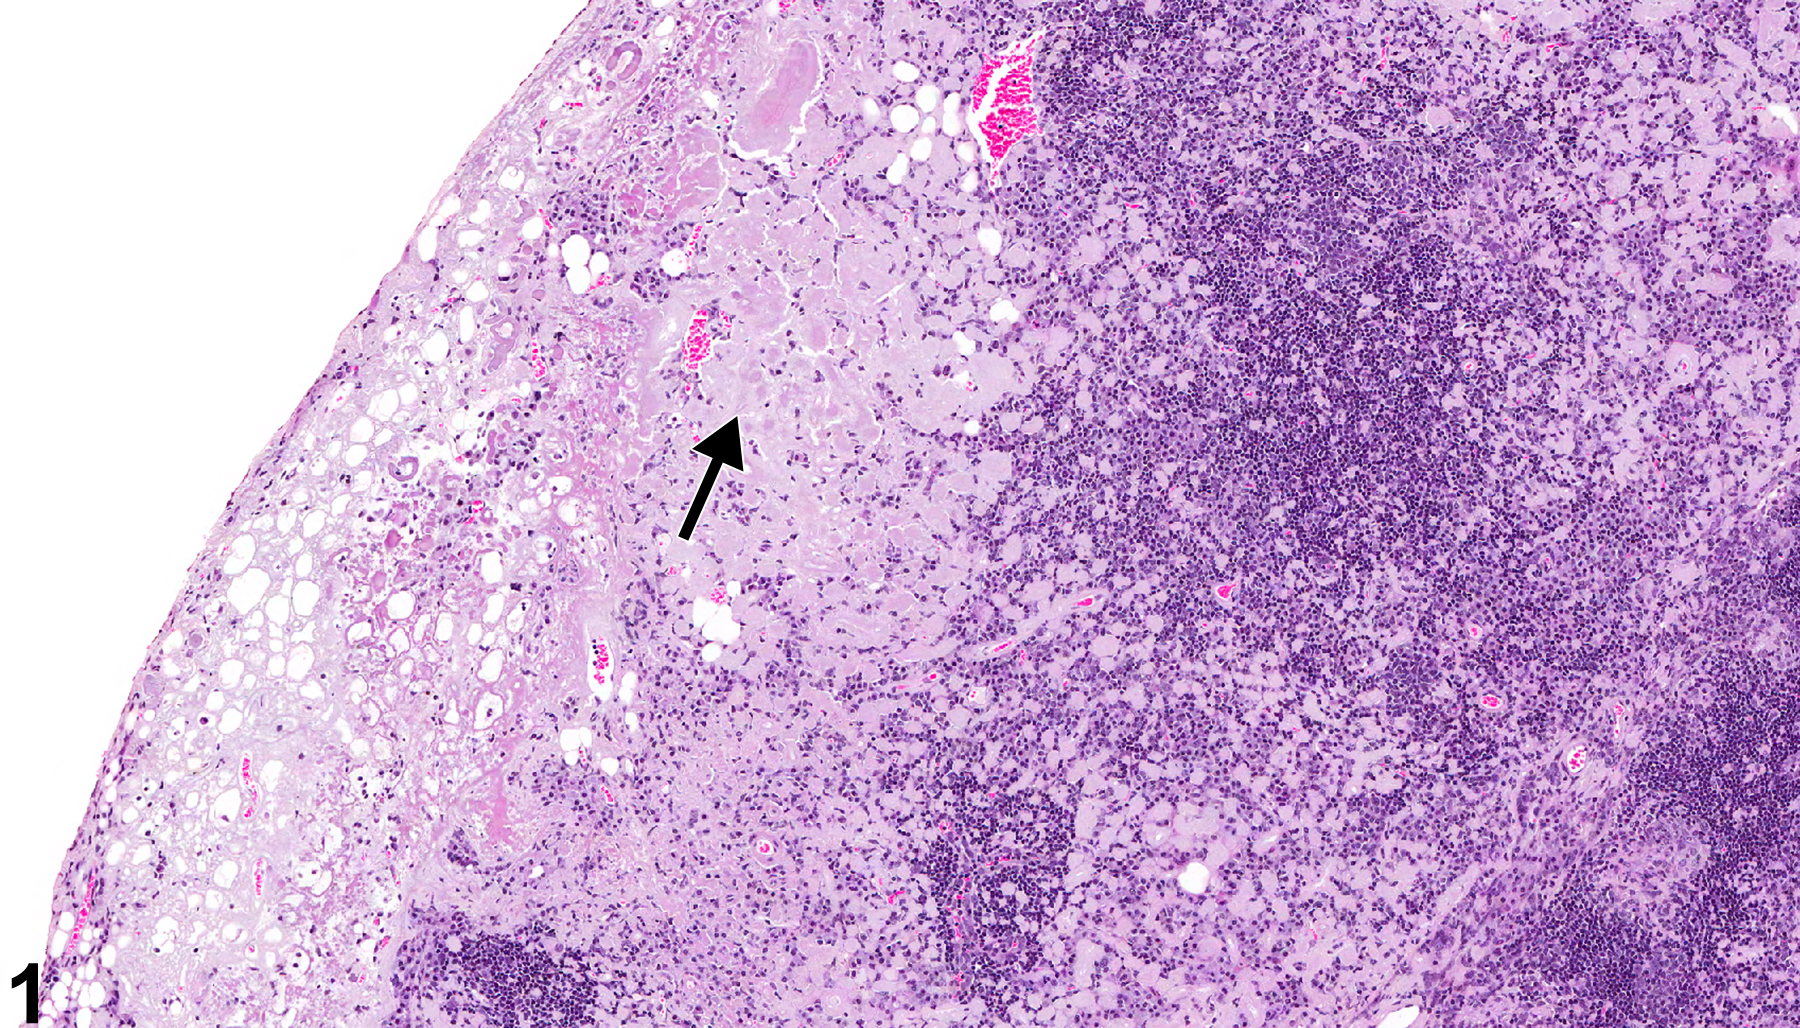 Image of amyloid in the thymus from a female B6C3F1/N mouse in a chronic study